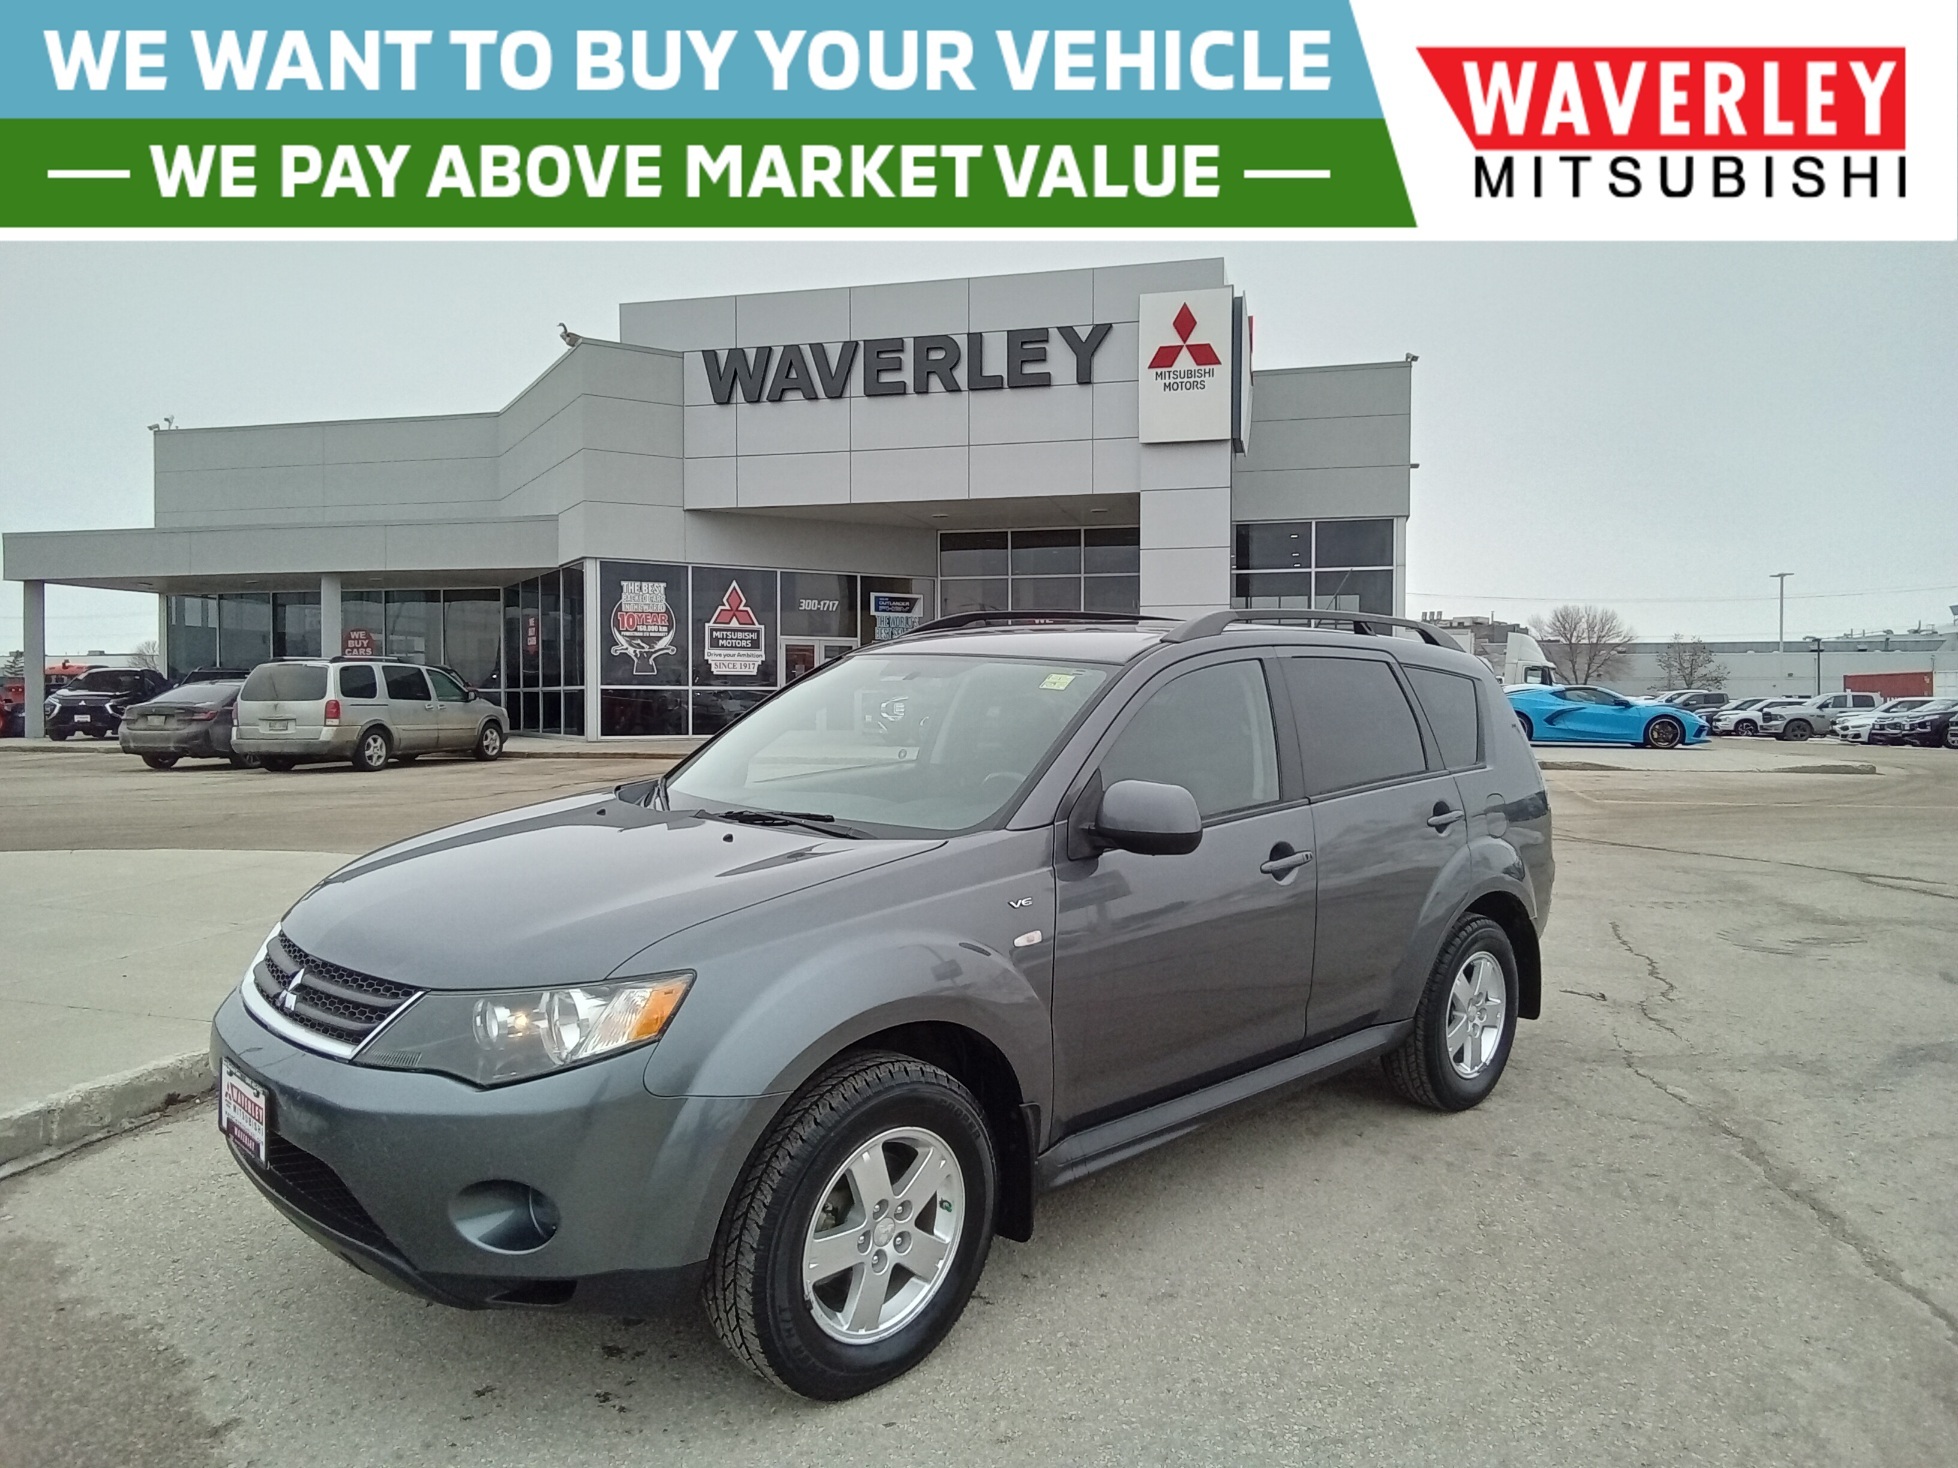 2009 Mitsubishi Outlander AWD V6 | Bought and serviced here exclusively SUV